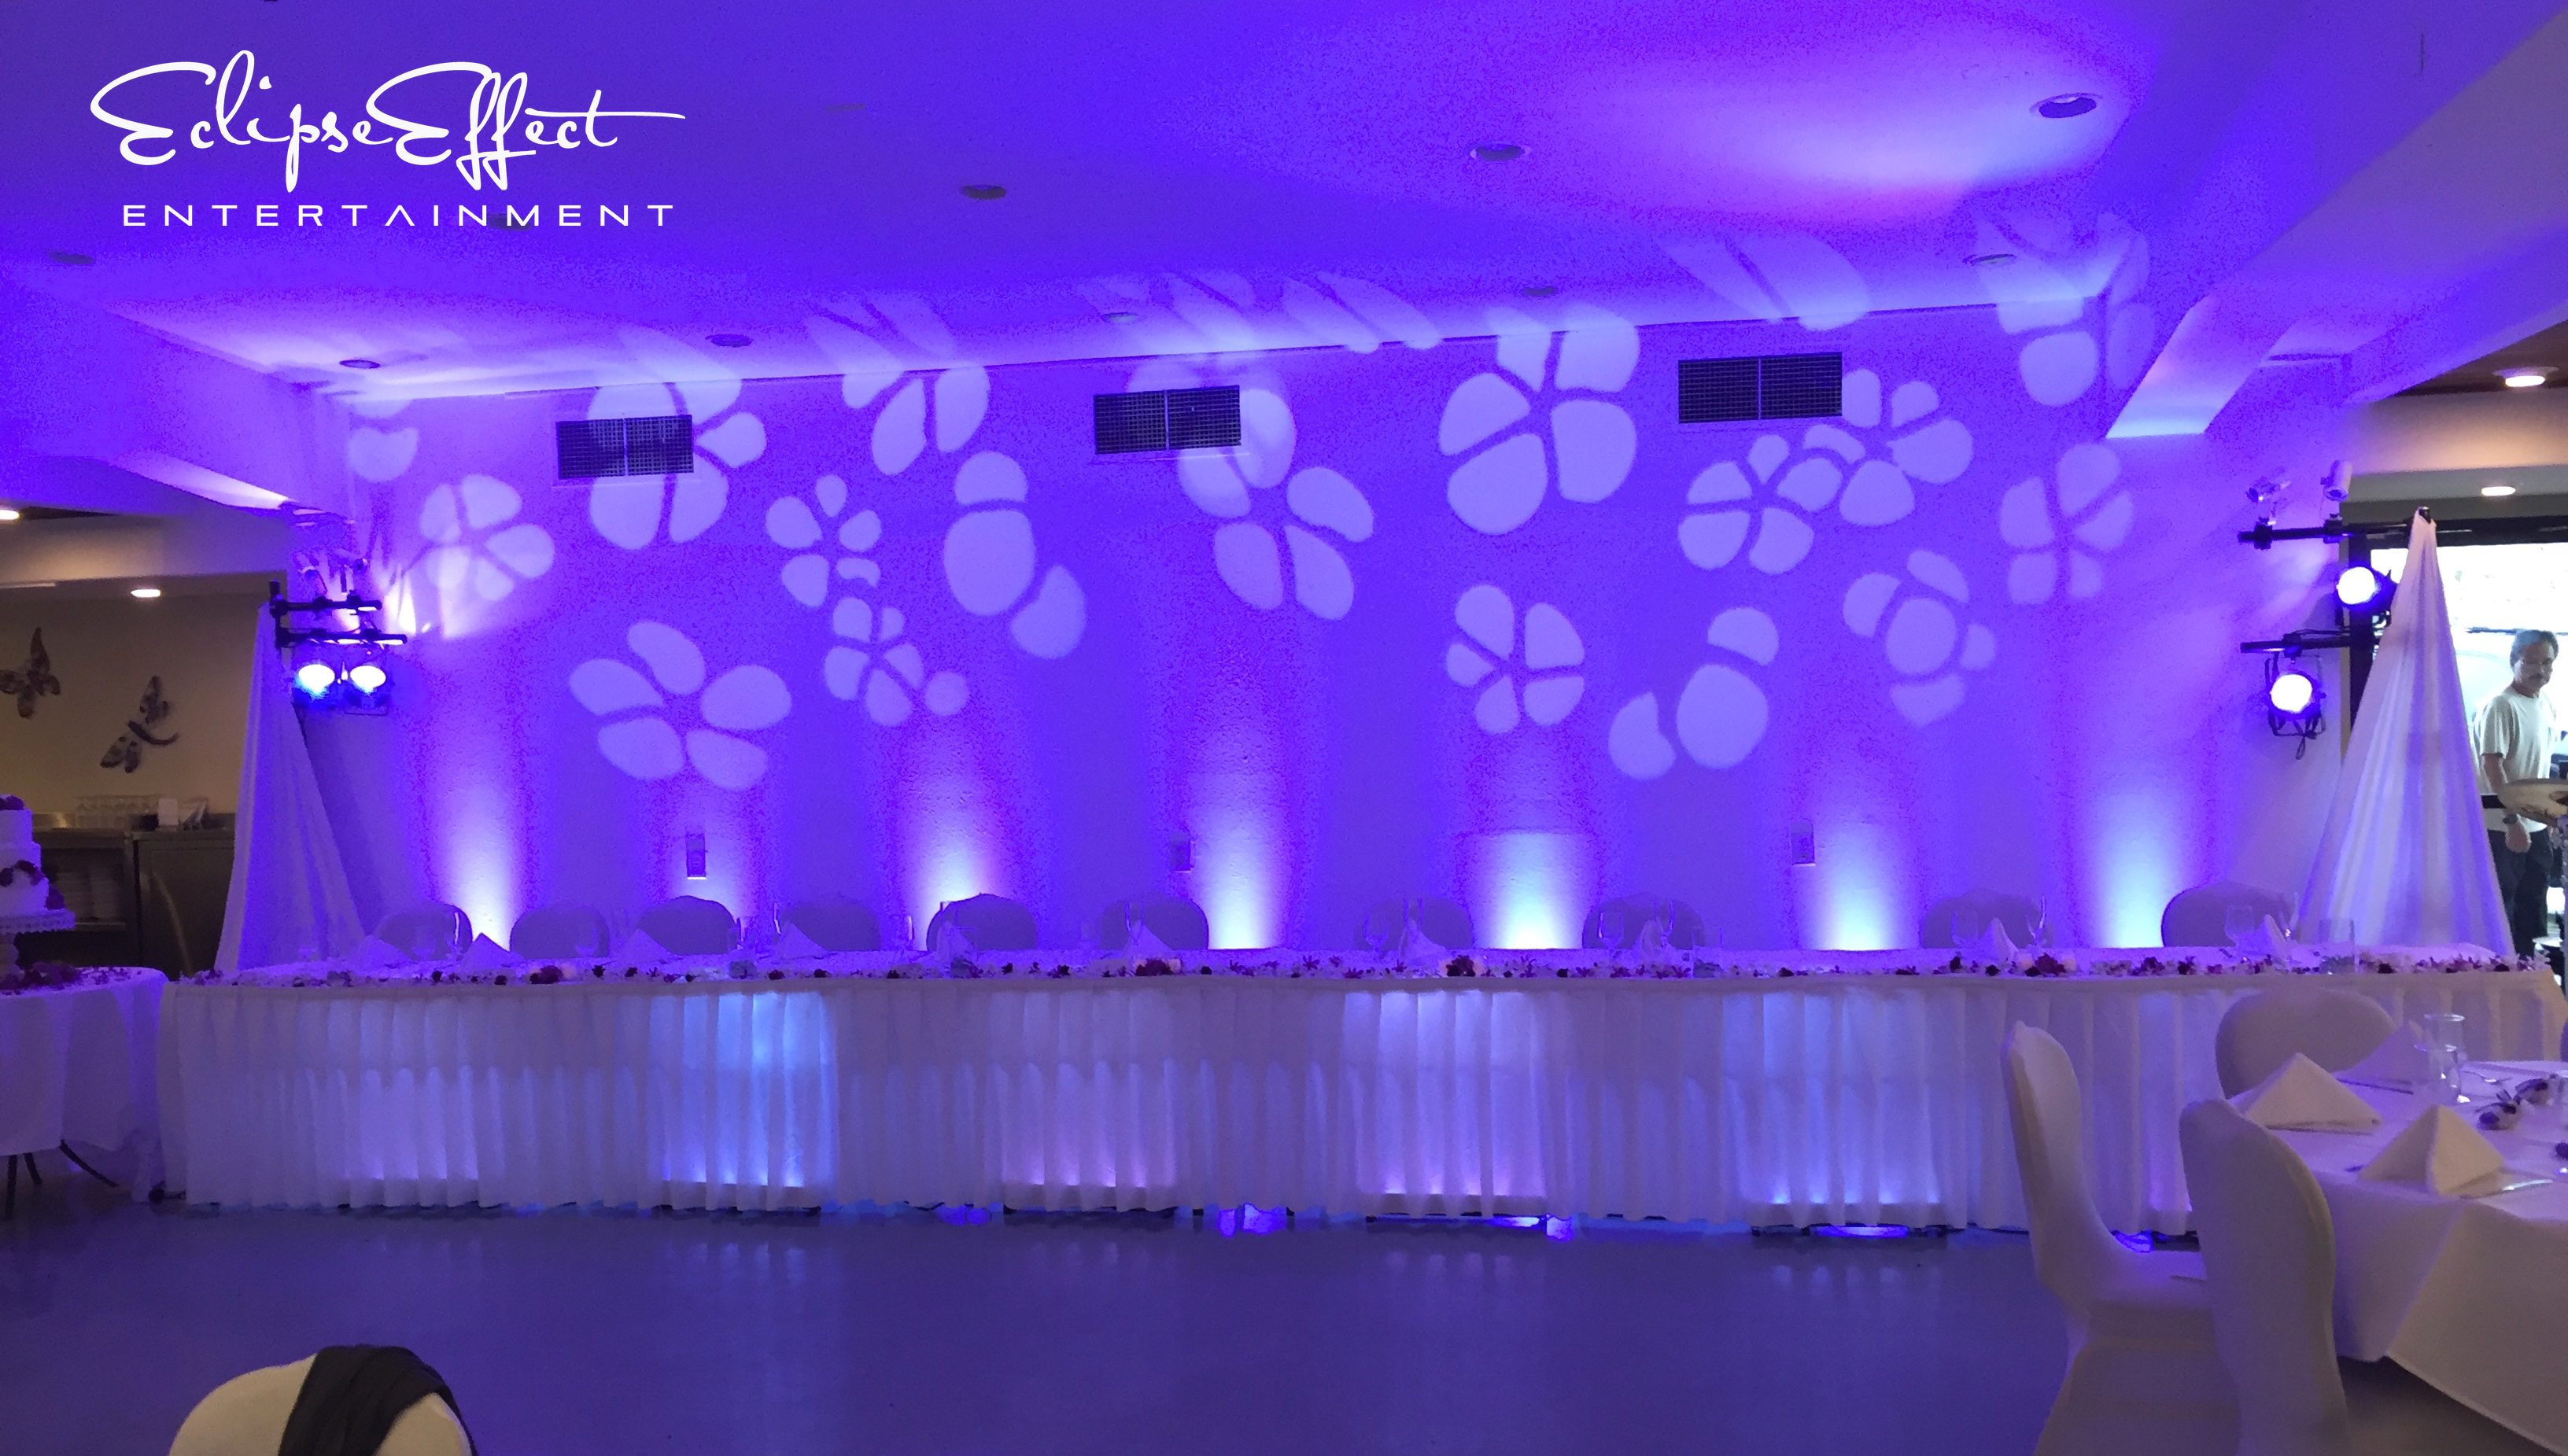 Head table uplighting in purple with cherry blossom design.